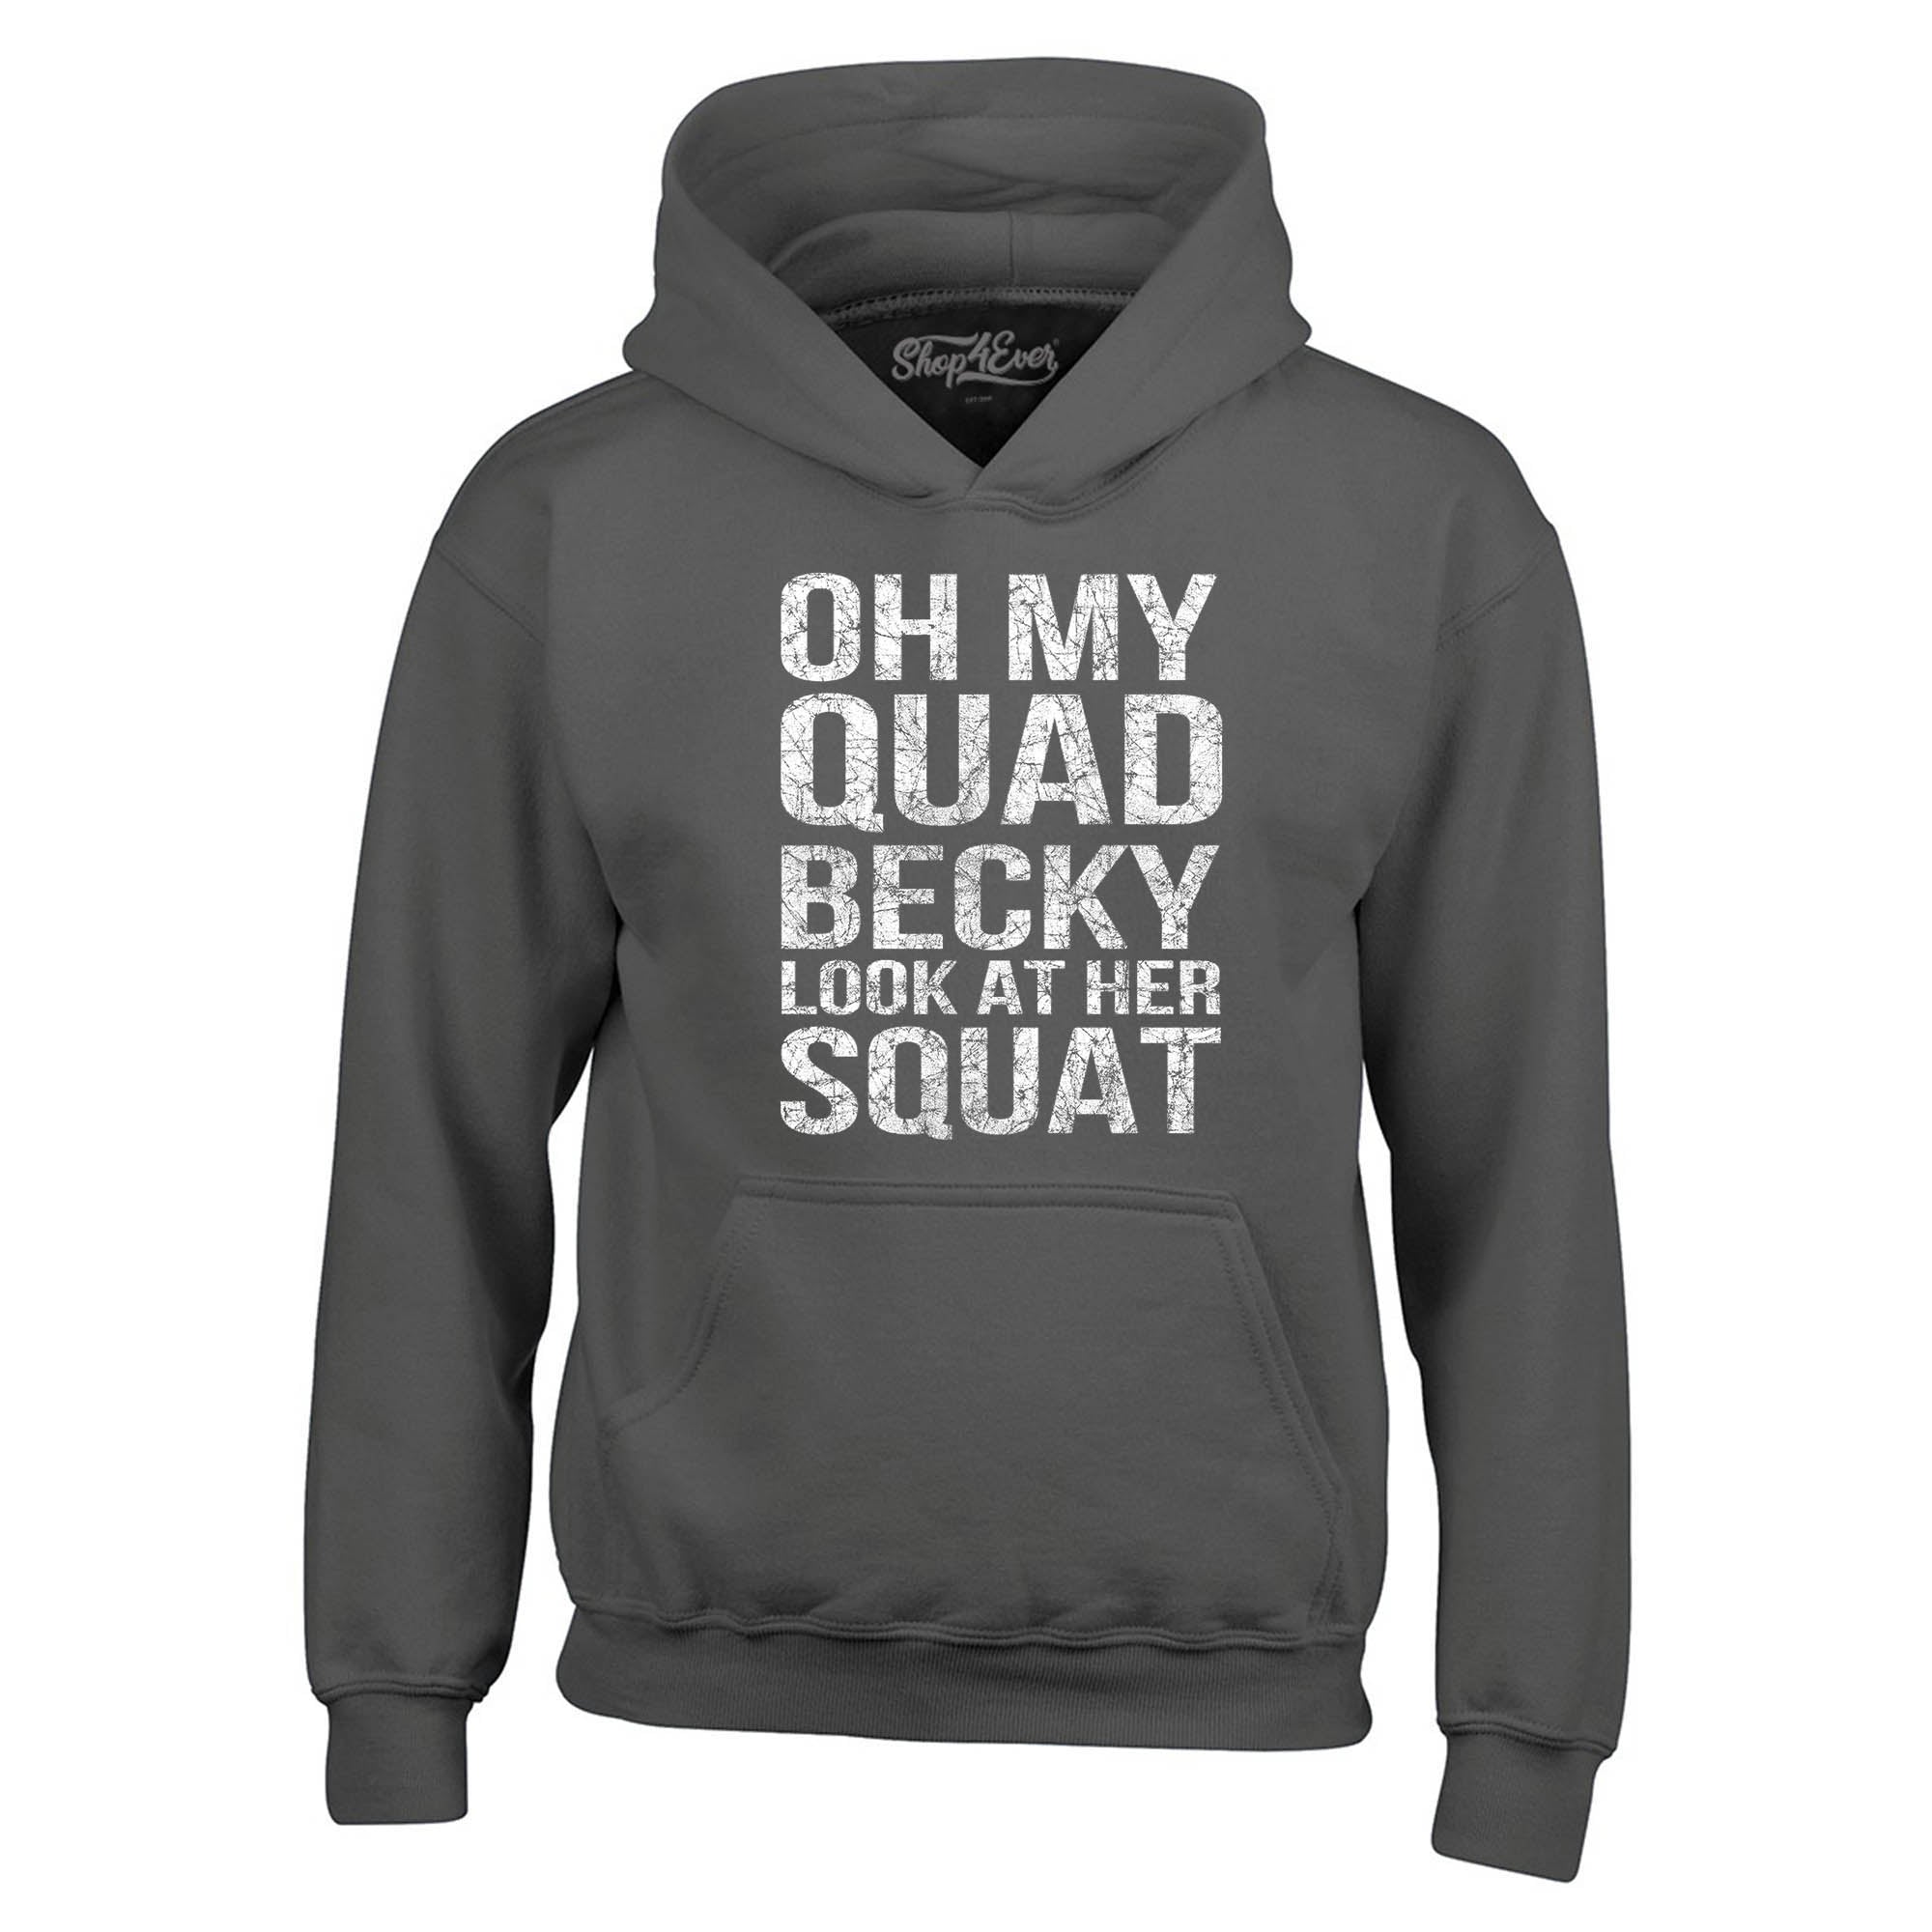 Oh My Quad Becky Look at Her Squat Hoodie Sweatshirts